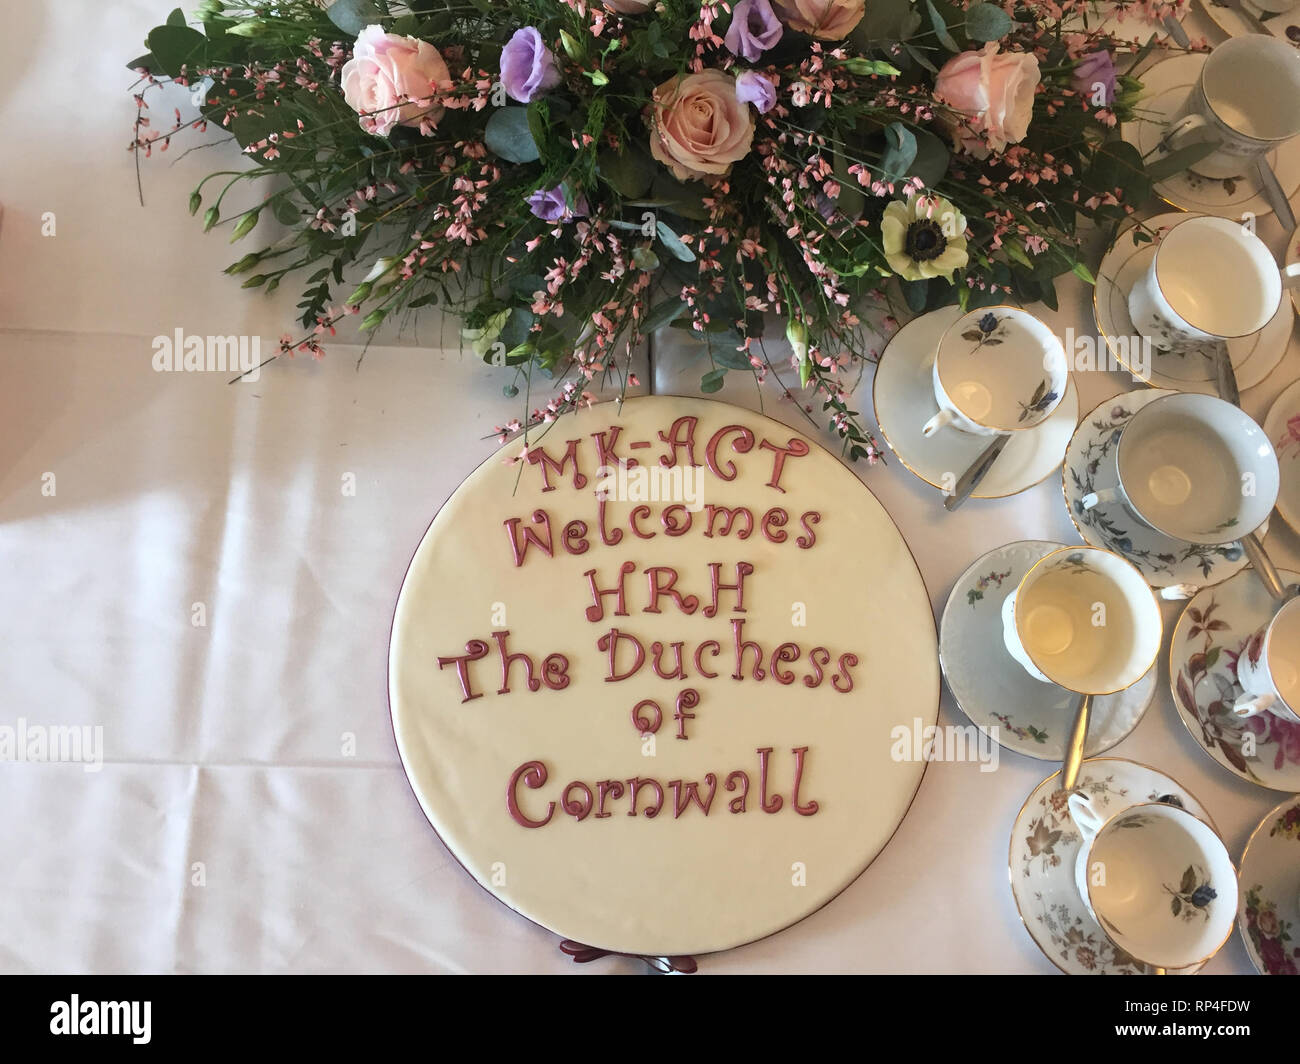 The cake made for the Duchess of Cornwall for her visit to MK-Act, a women's refuge in Milton Keynes. Stock Photo